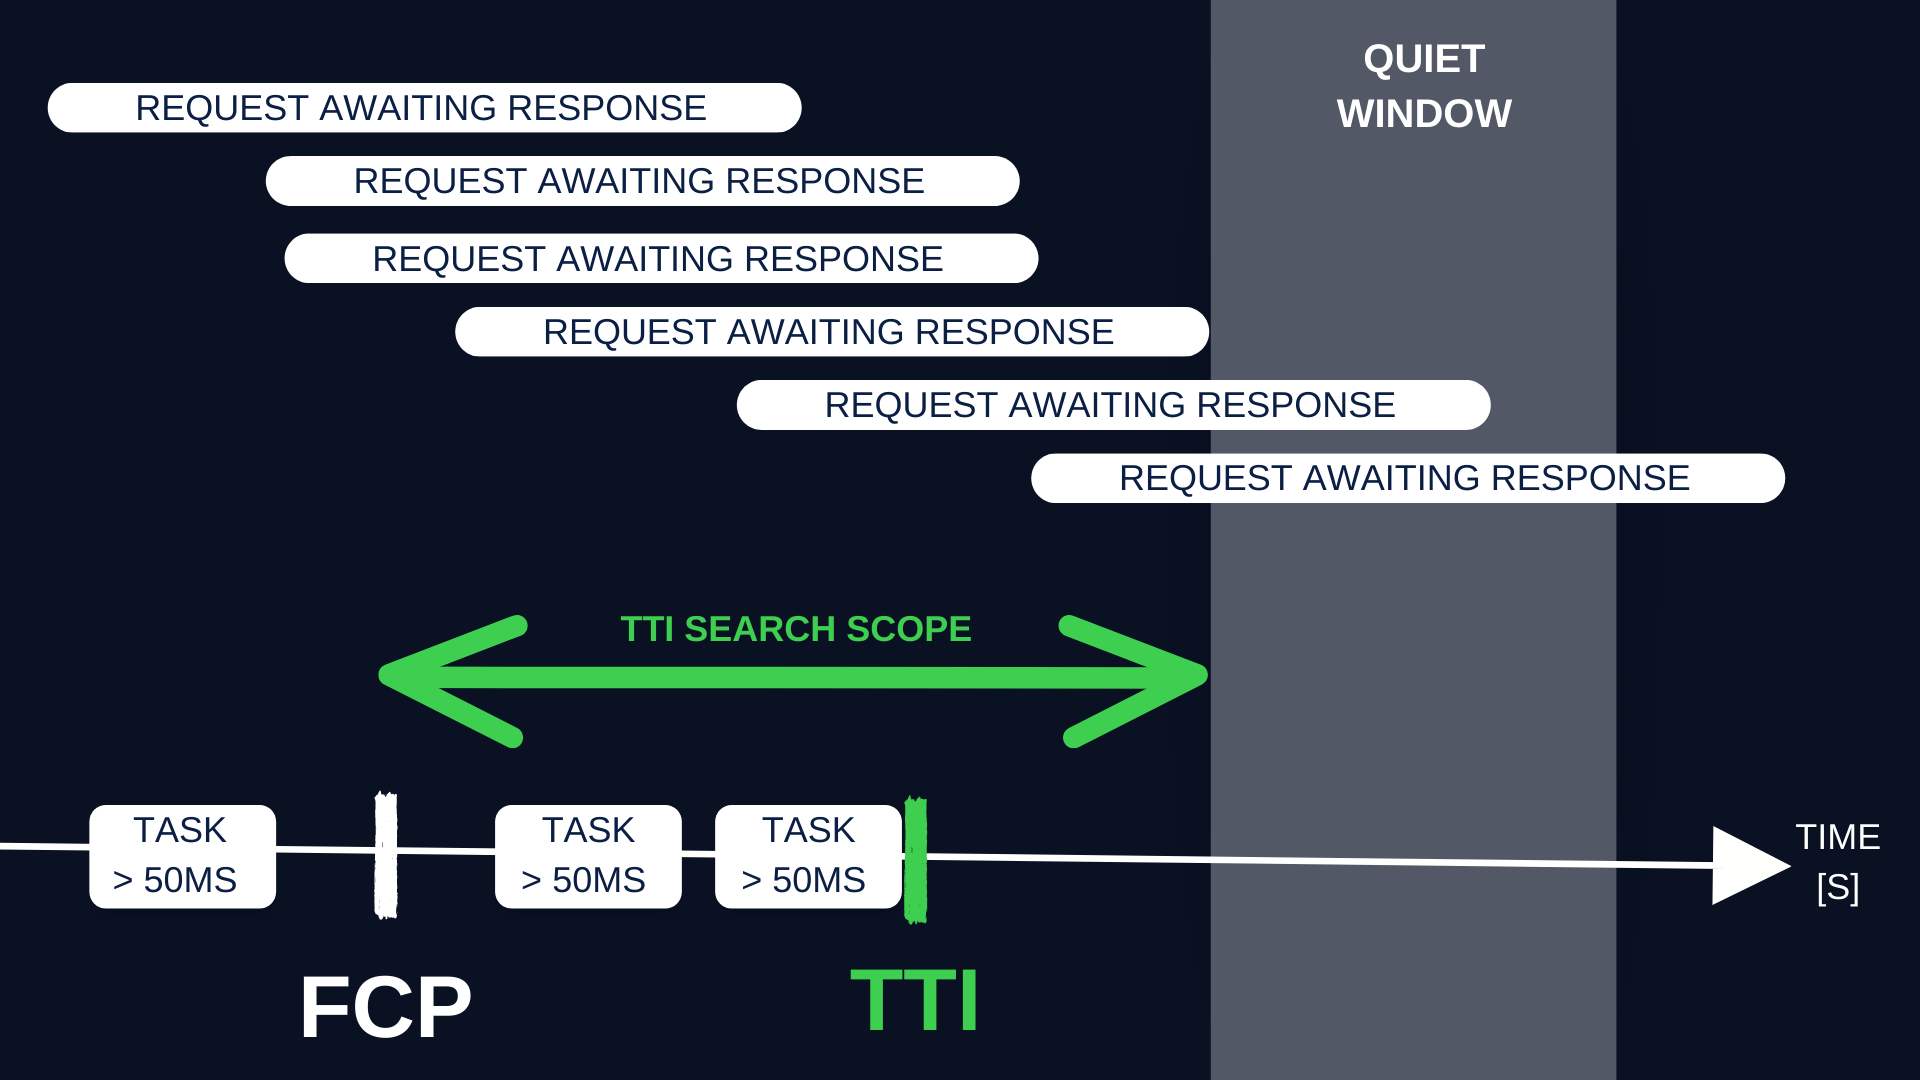 The timeline presentation showcases the loading process of the page, with emphasis on the TTI search scope.